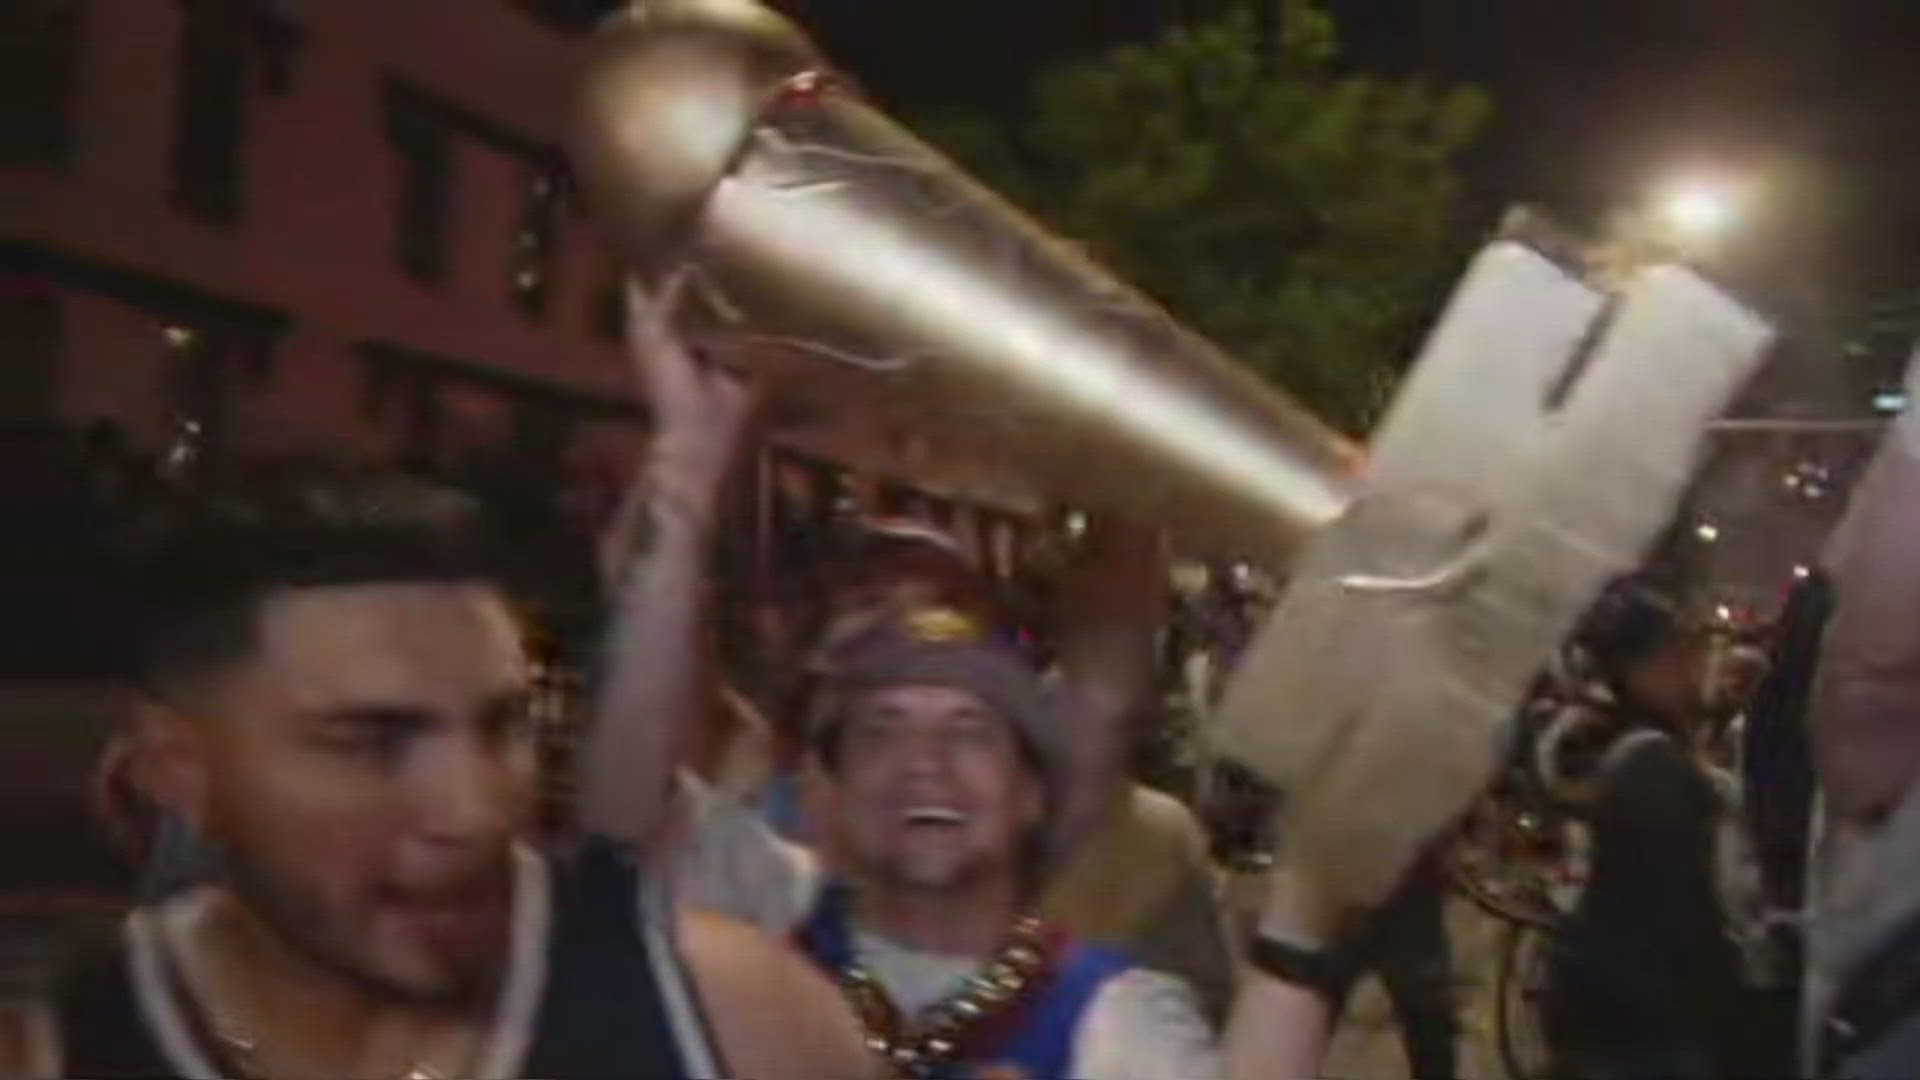 A large crowd of people gathered at 20th and Market in LoDo to celebrate the Nuggets' first-ever NBA Finals championship.